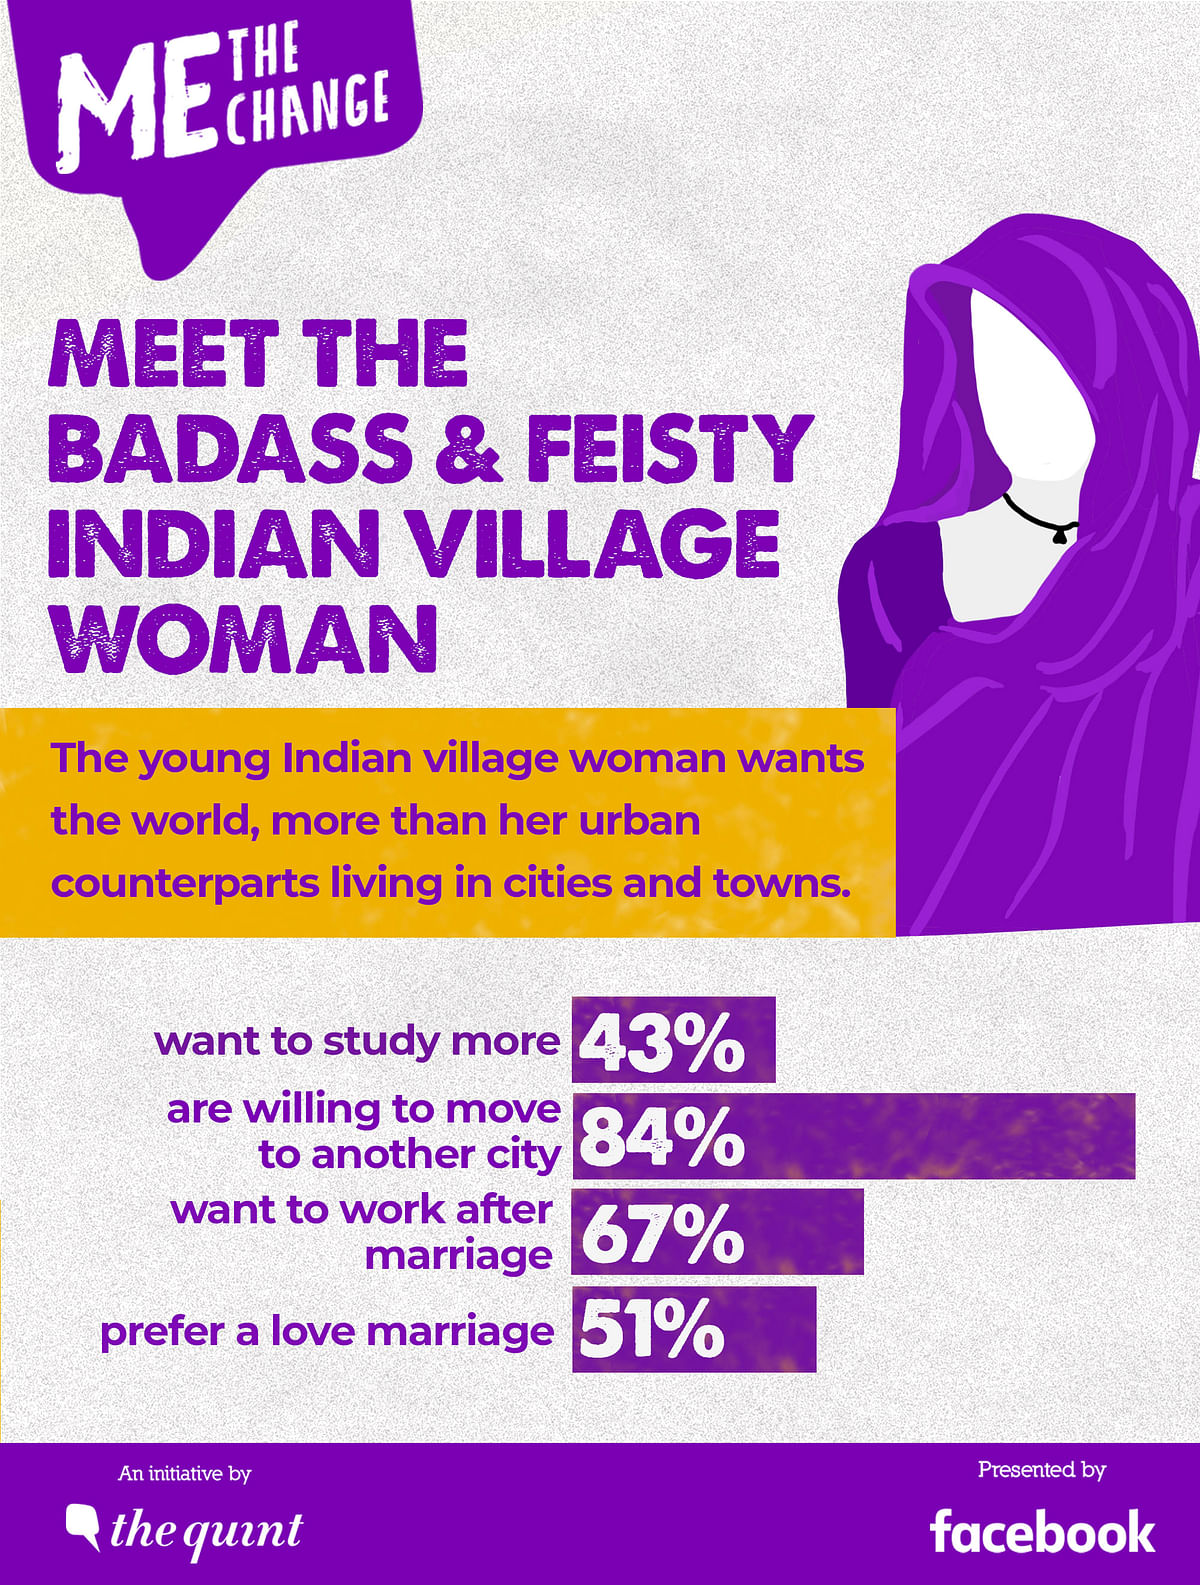  Lokniti-CSDS-The Quint survey shows that the young Indian village woman is more ambitious than her city counterpart